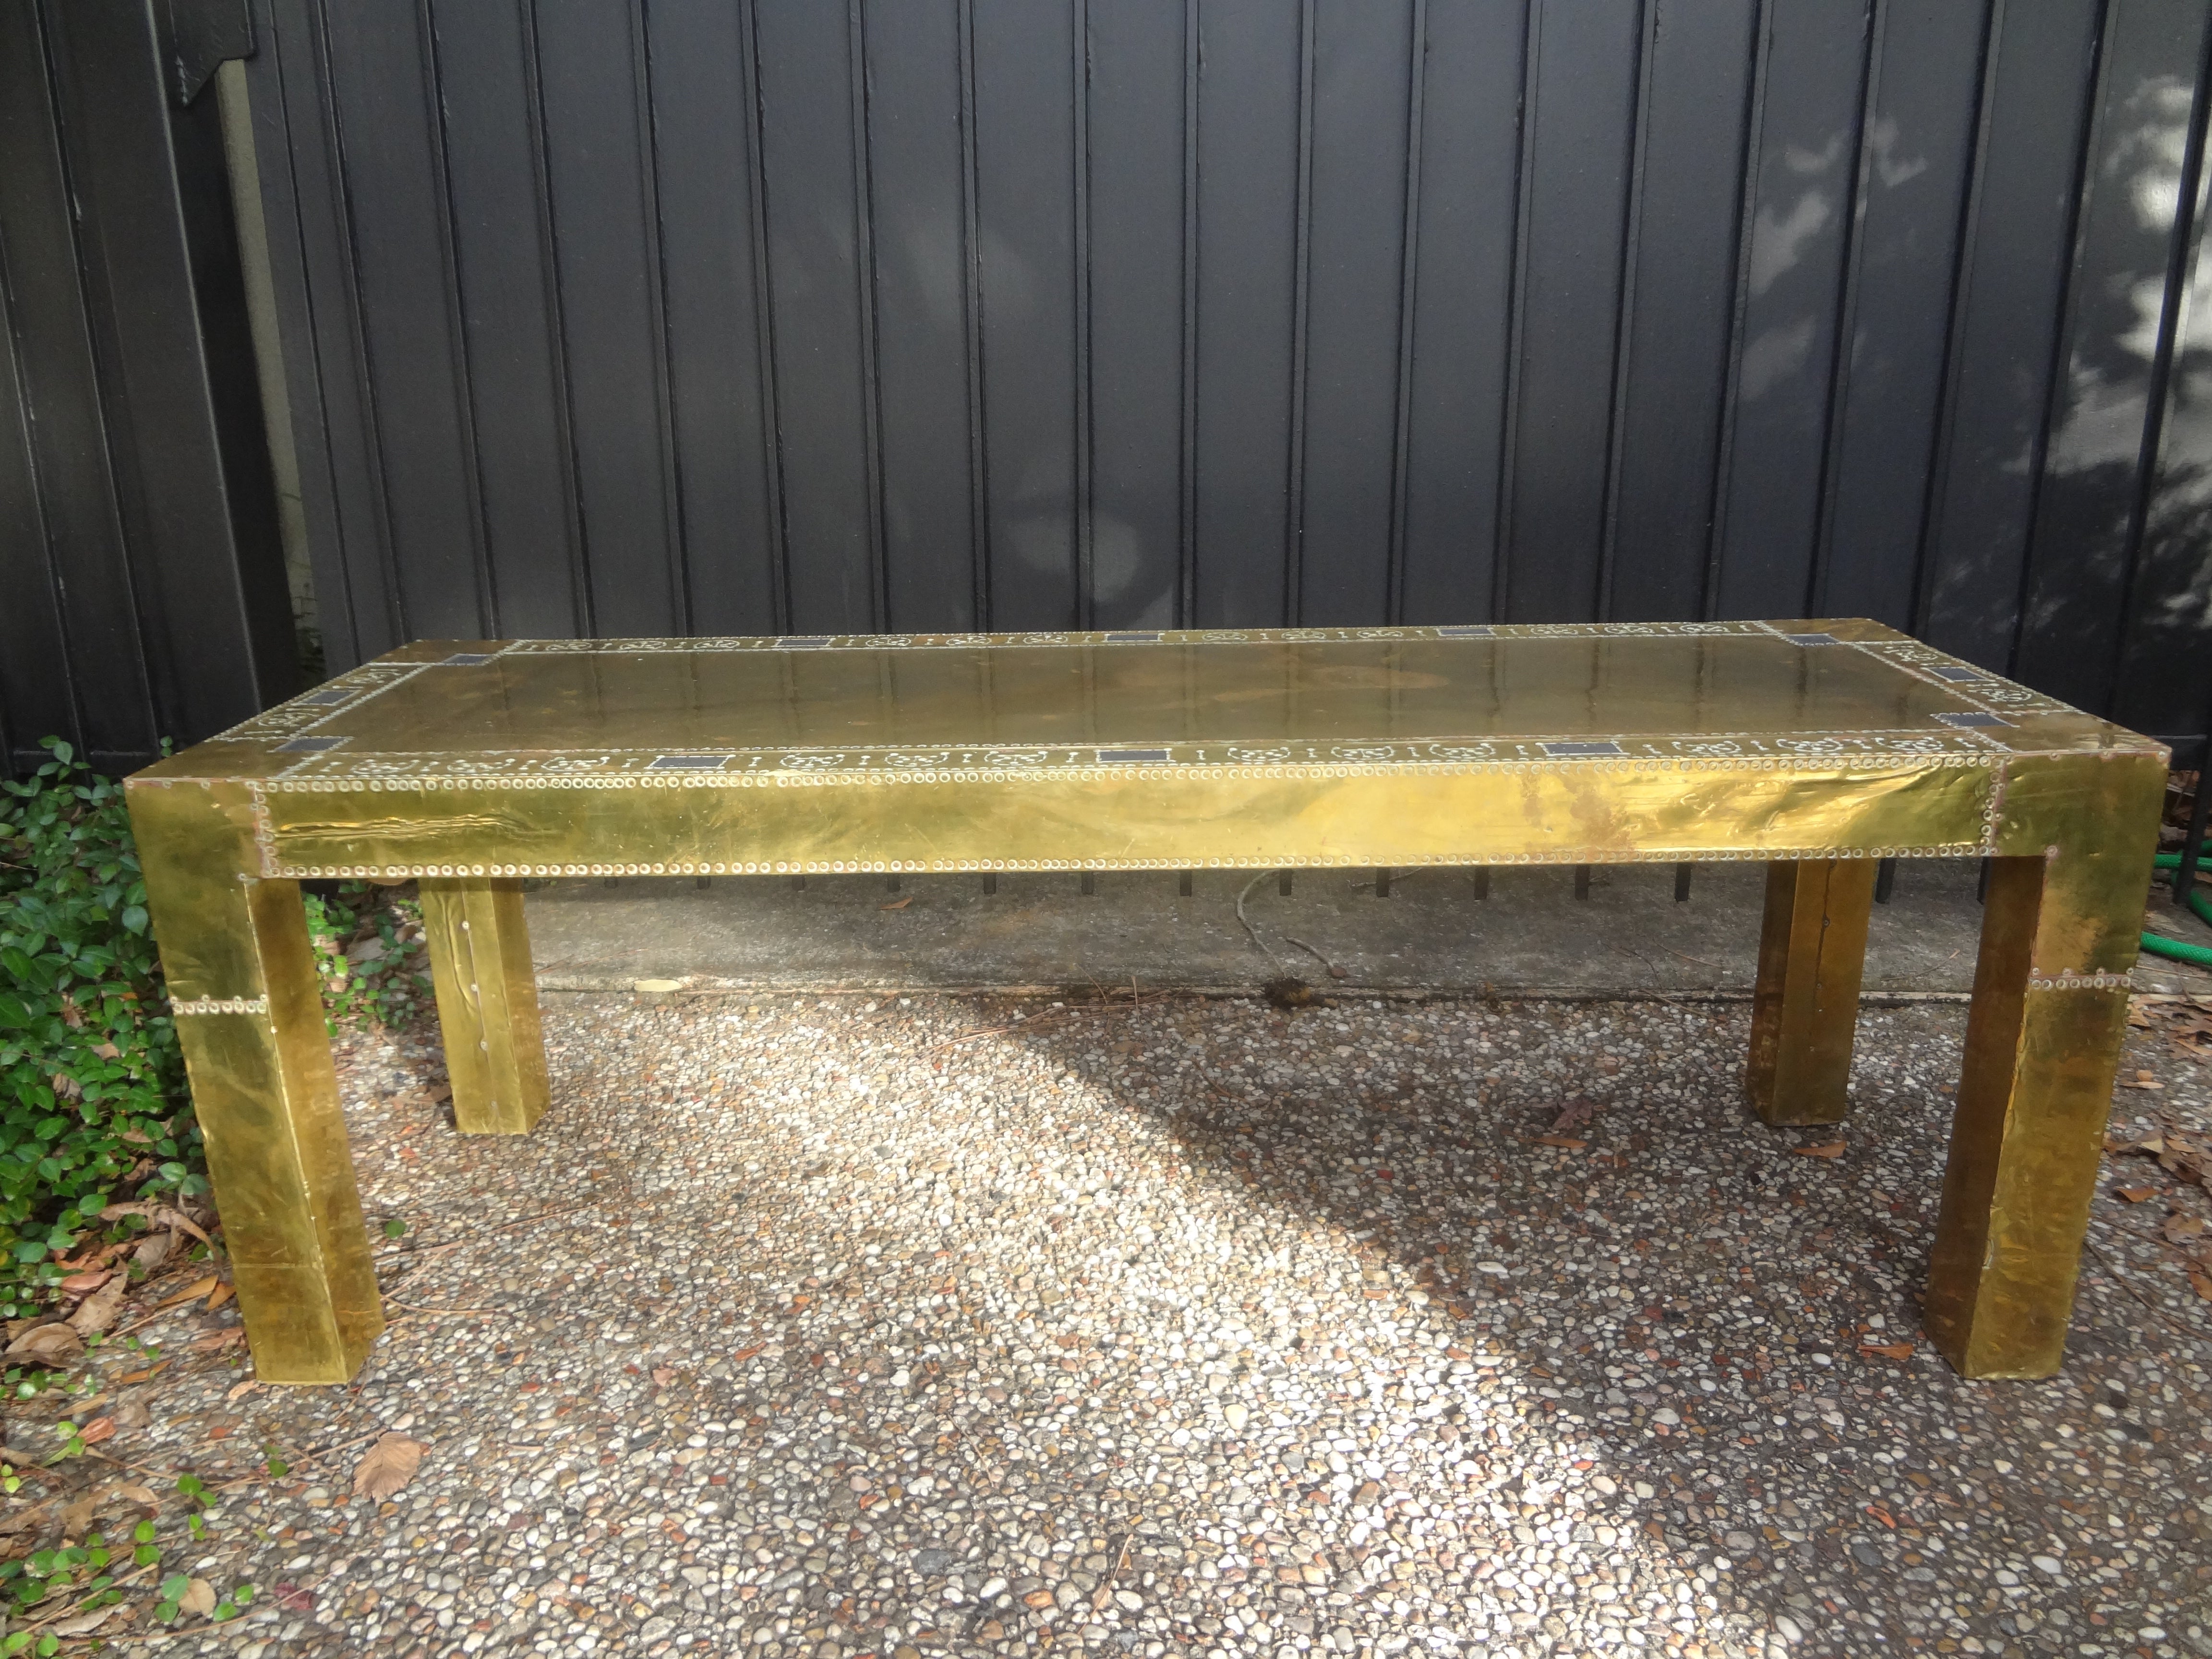 Brass Clad Coffee Table Or Bench By R. Dubarry.
Spanish hand hammered riveted brass clad coffee table in the Parsons style.
This handsome brass cocktail table could also be used as a bench.
This was created in the 1970's by Rodolfo Dubarry.